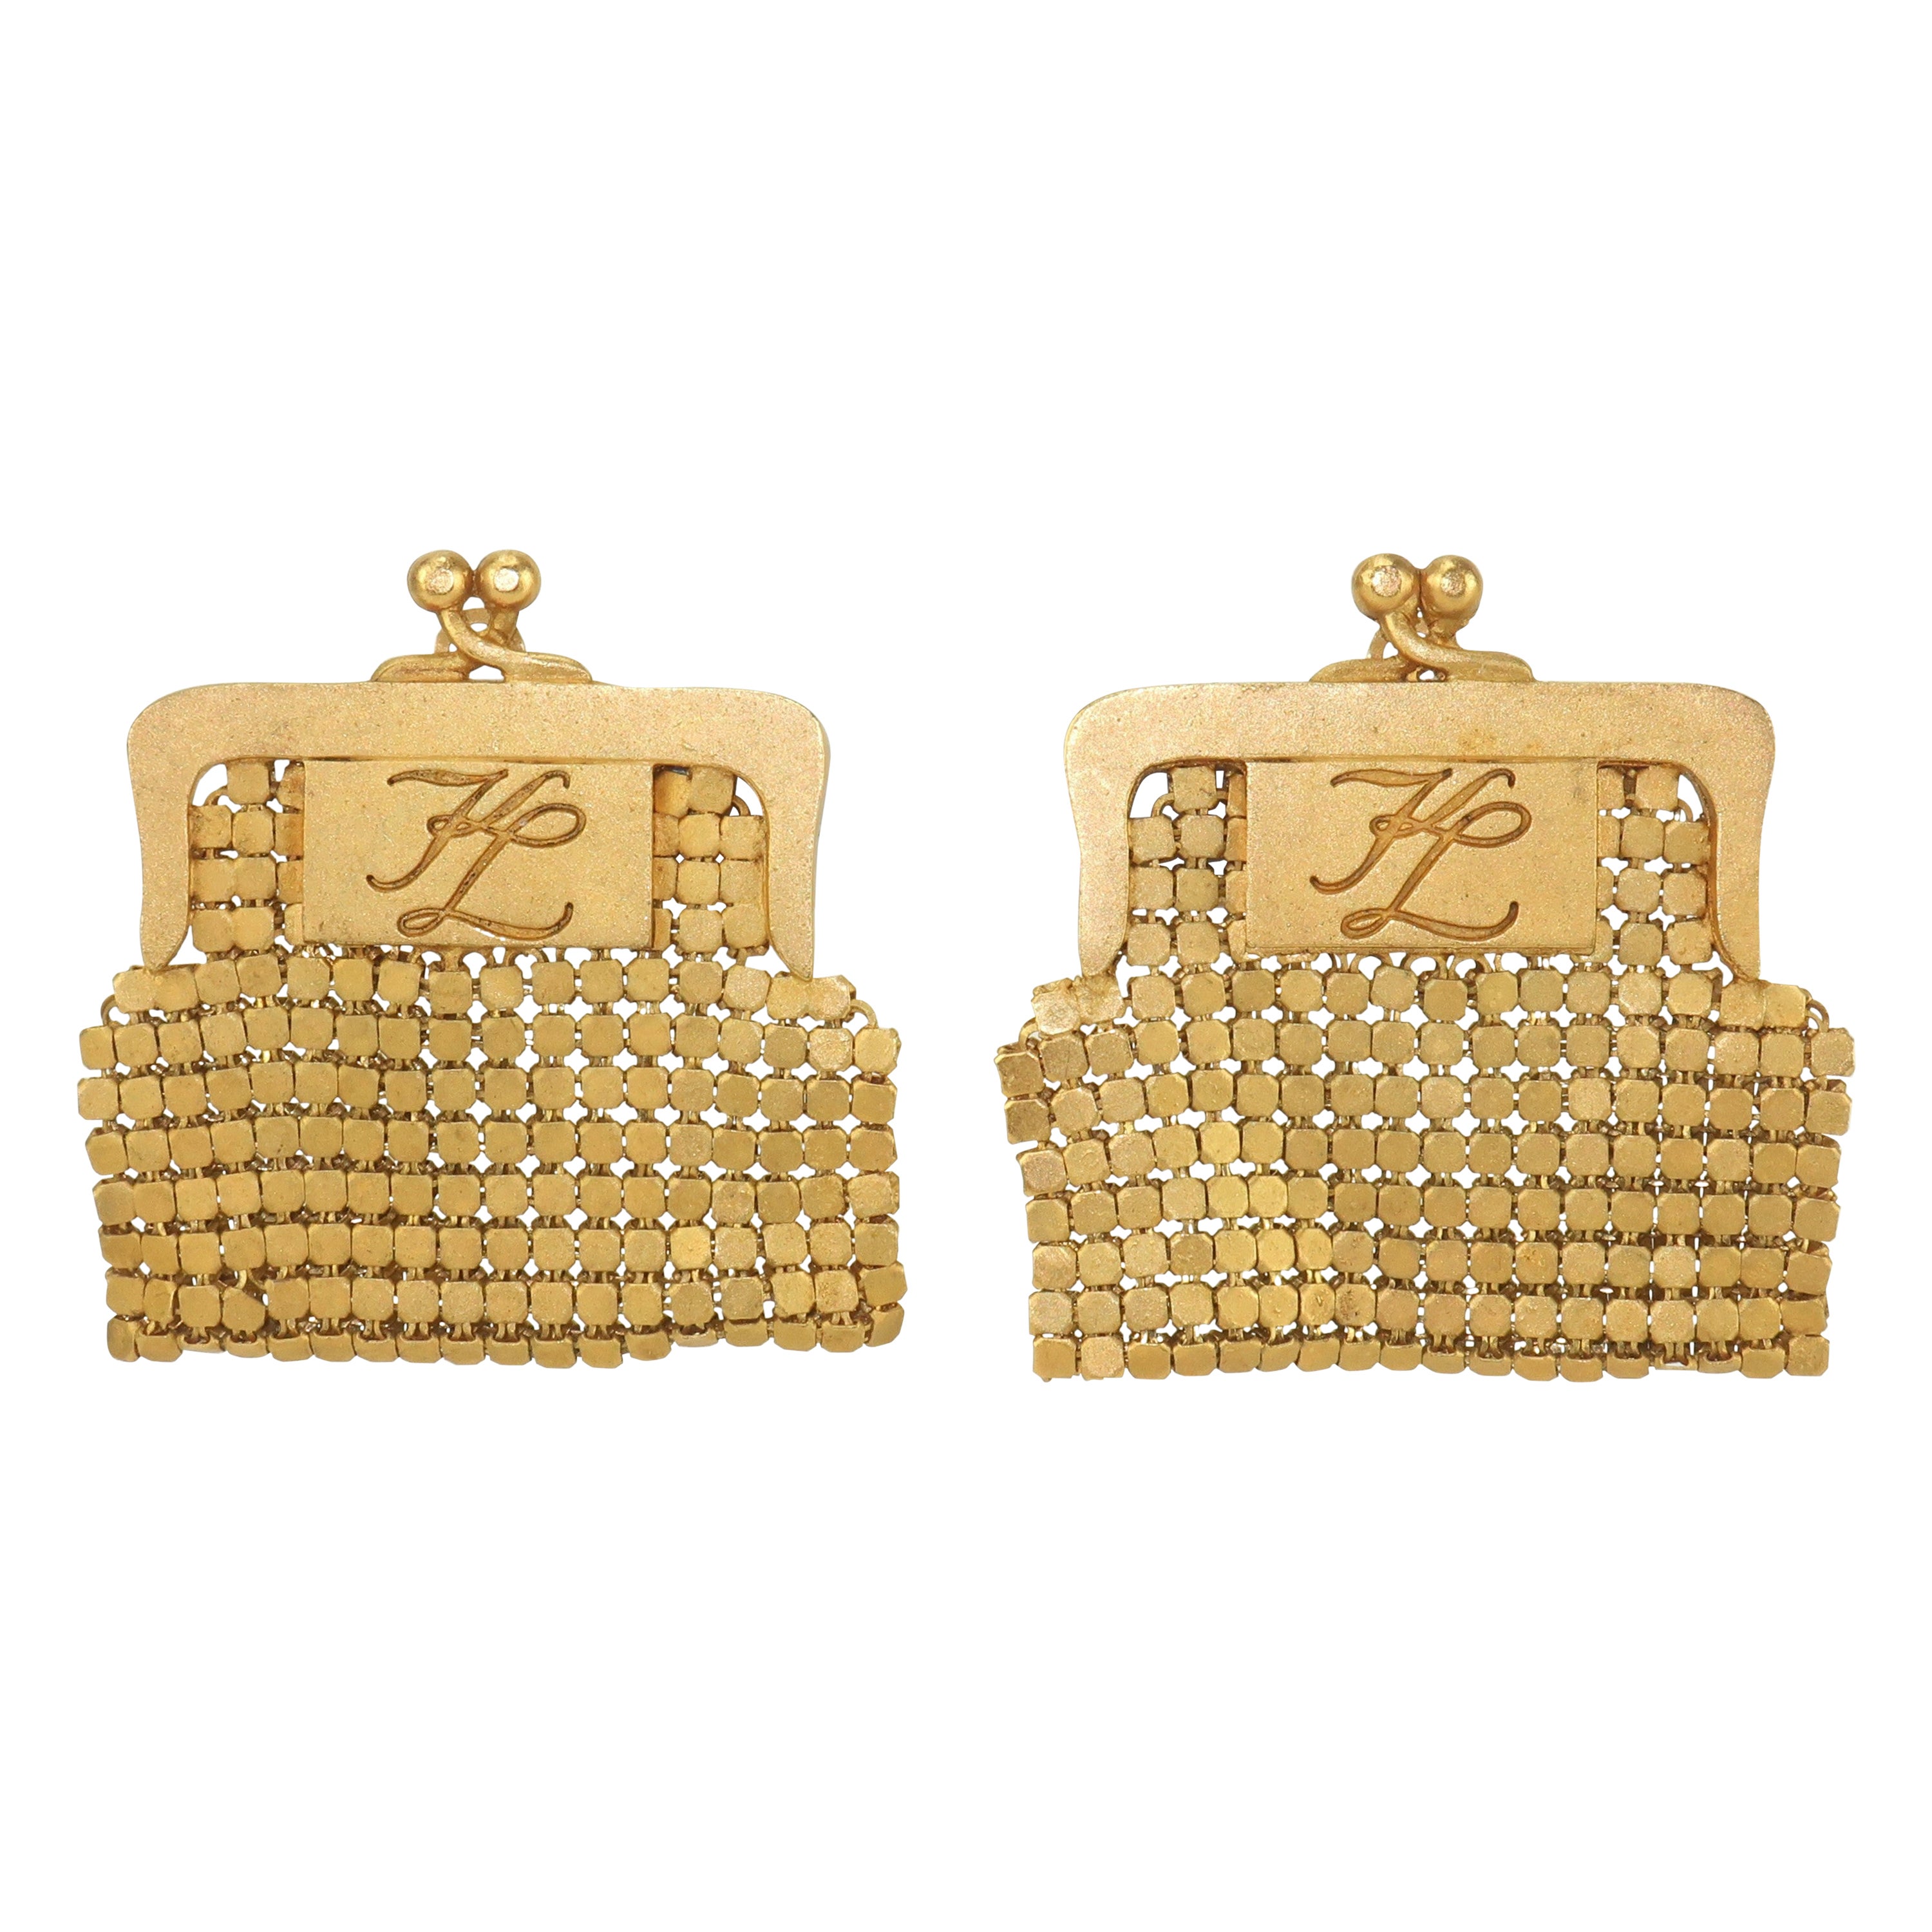 Vintage Karl Lagerfeld Gold Mesh Coin Purse Earrings For Sale